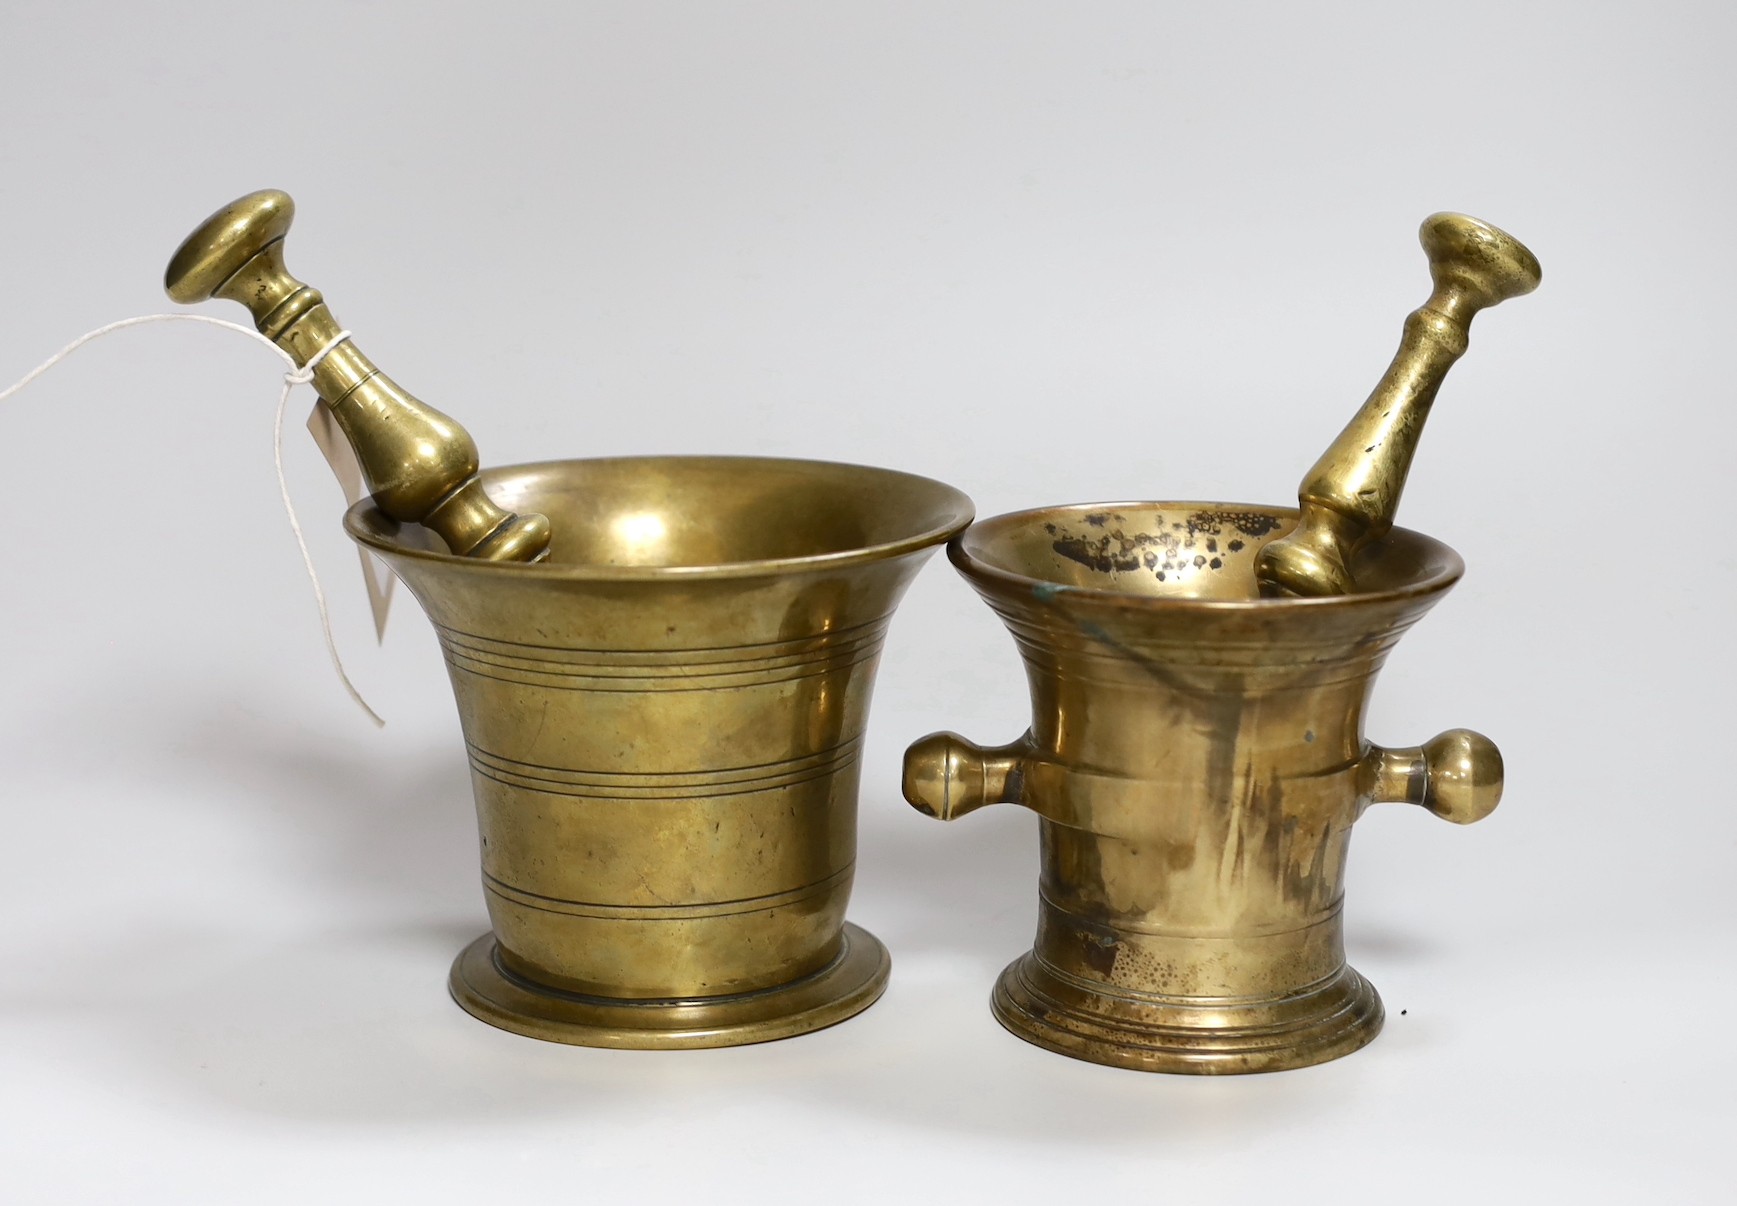 Two 18th/19th century brass mortars, with pestles